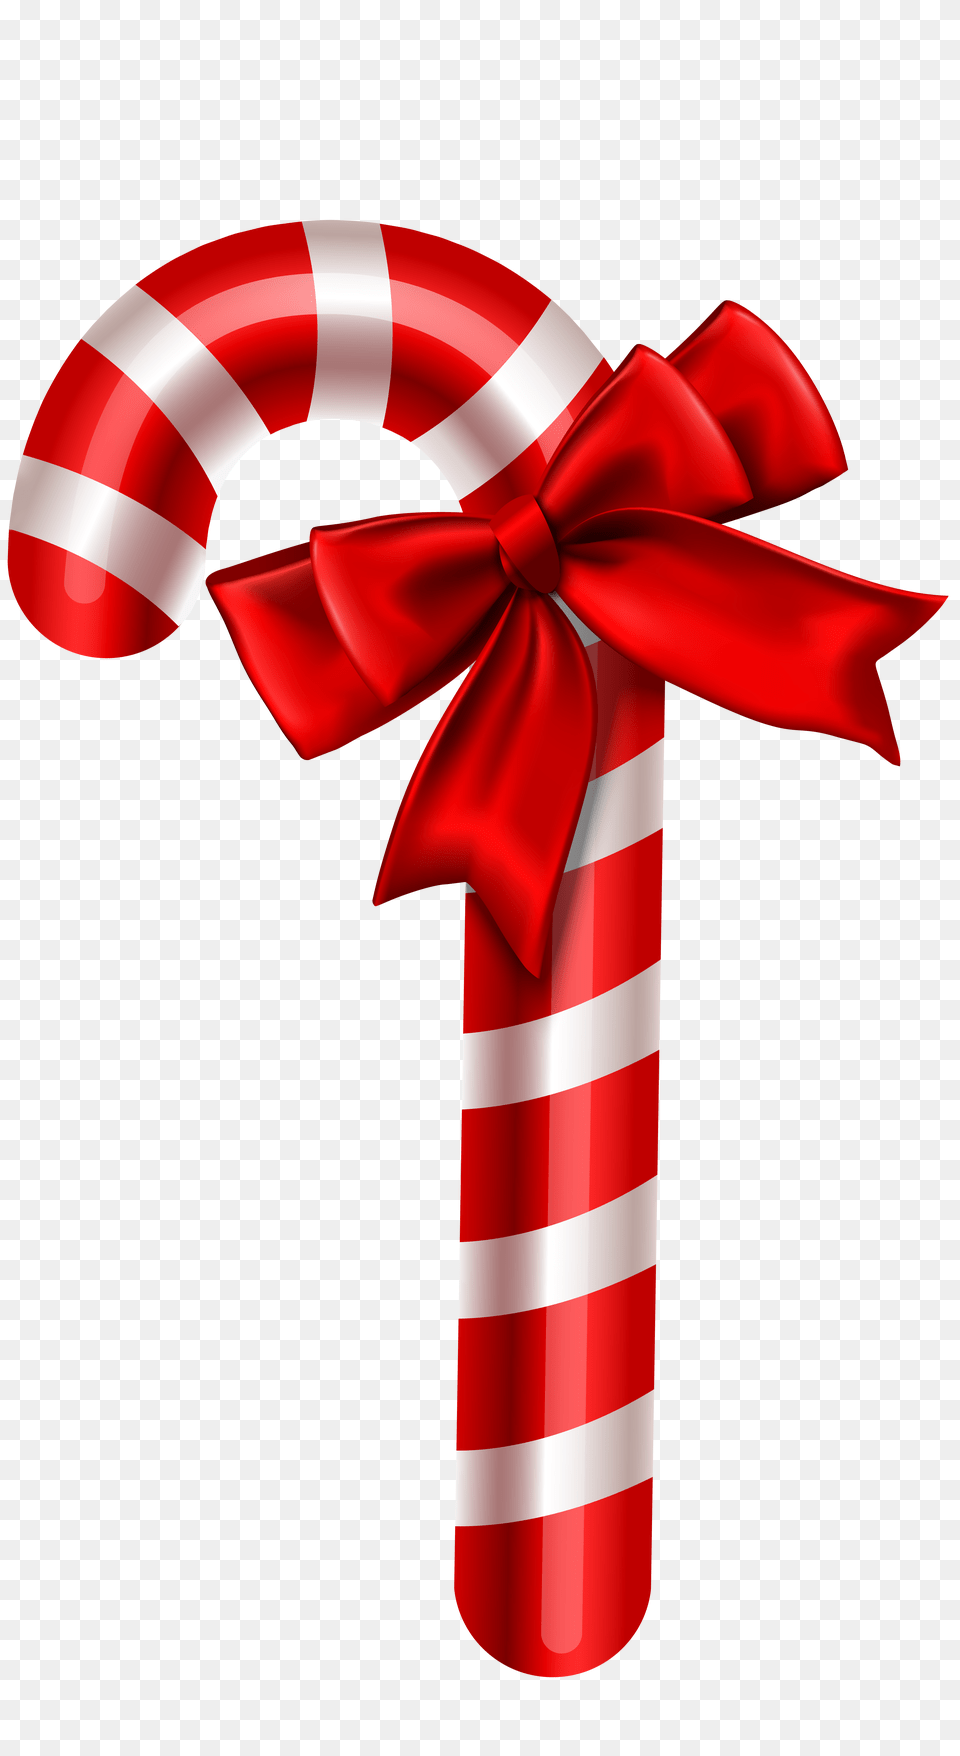 Christmas Candy Images Free Download Christmas Candy, Food, Sweets, Dynamite, Weapon Png